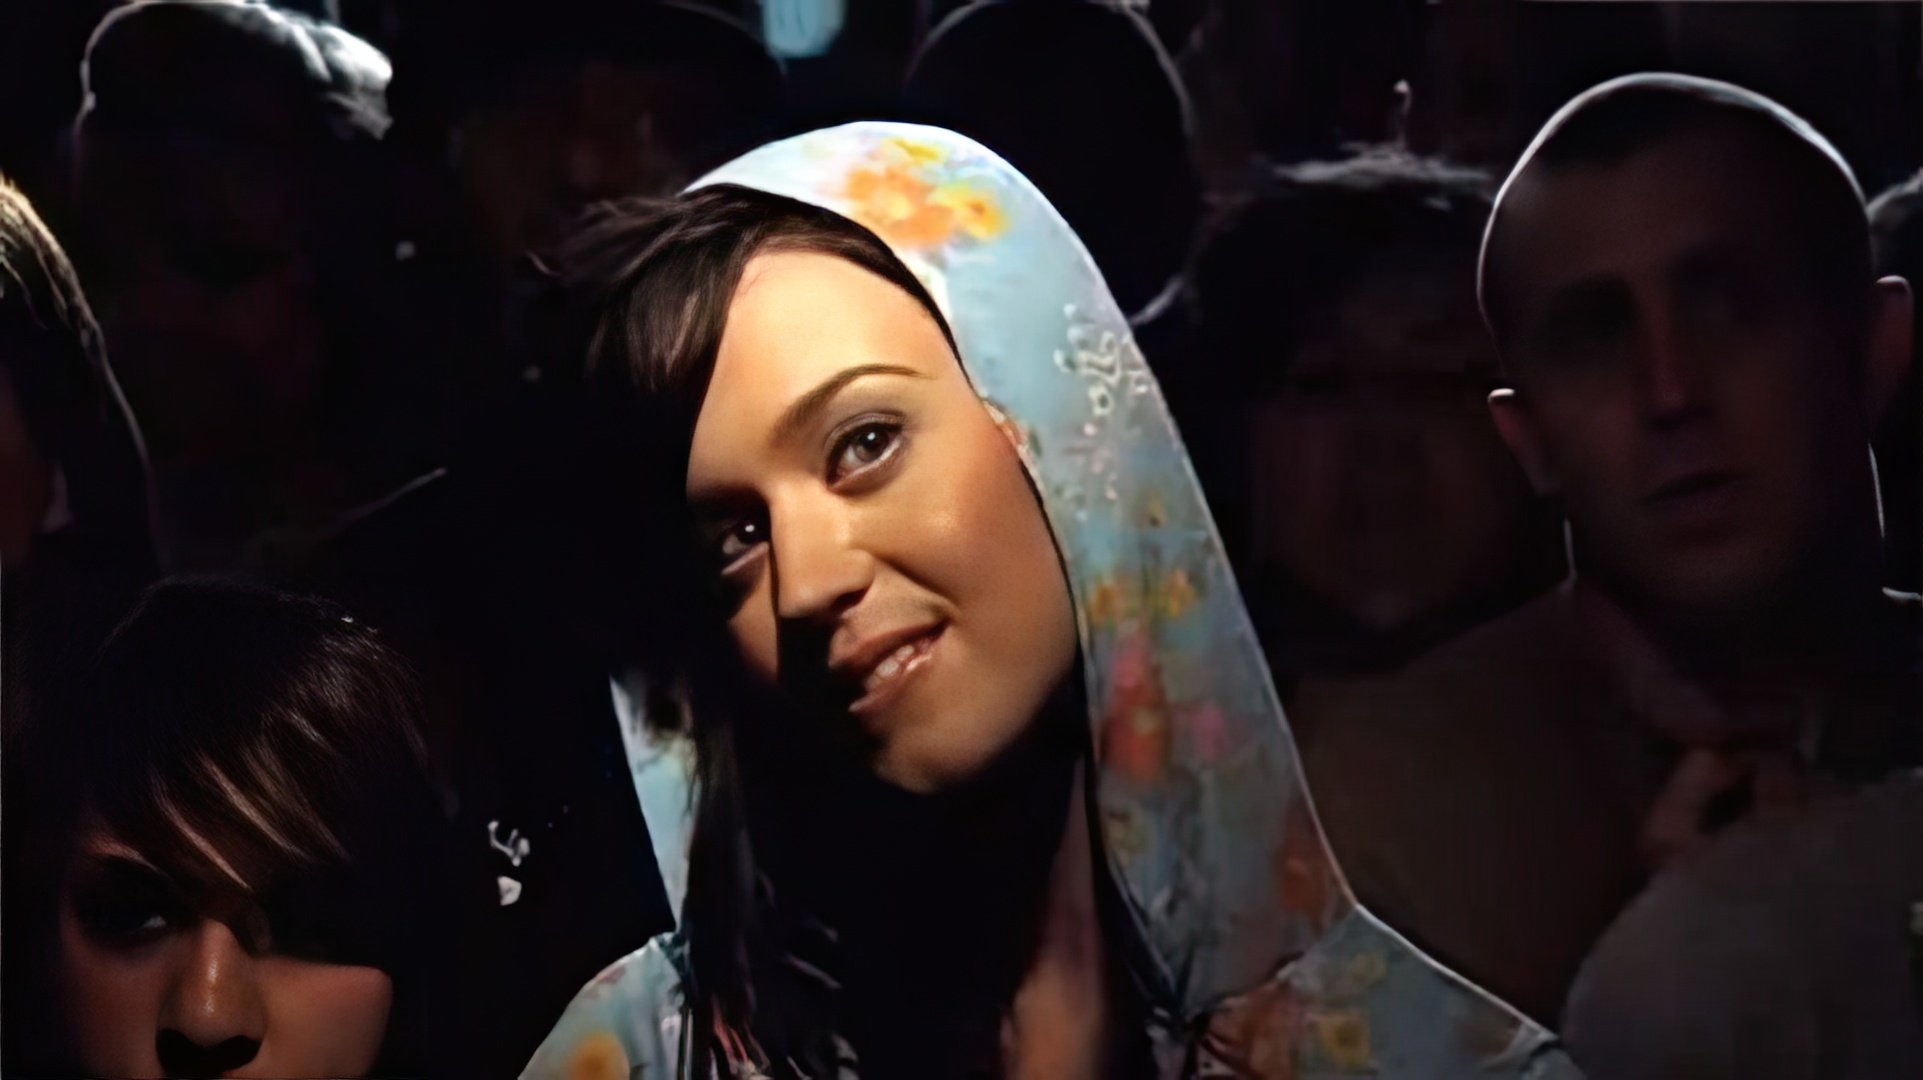 Katy Perry in the Gym Class Heroes music video